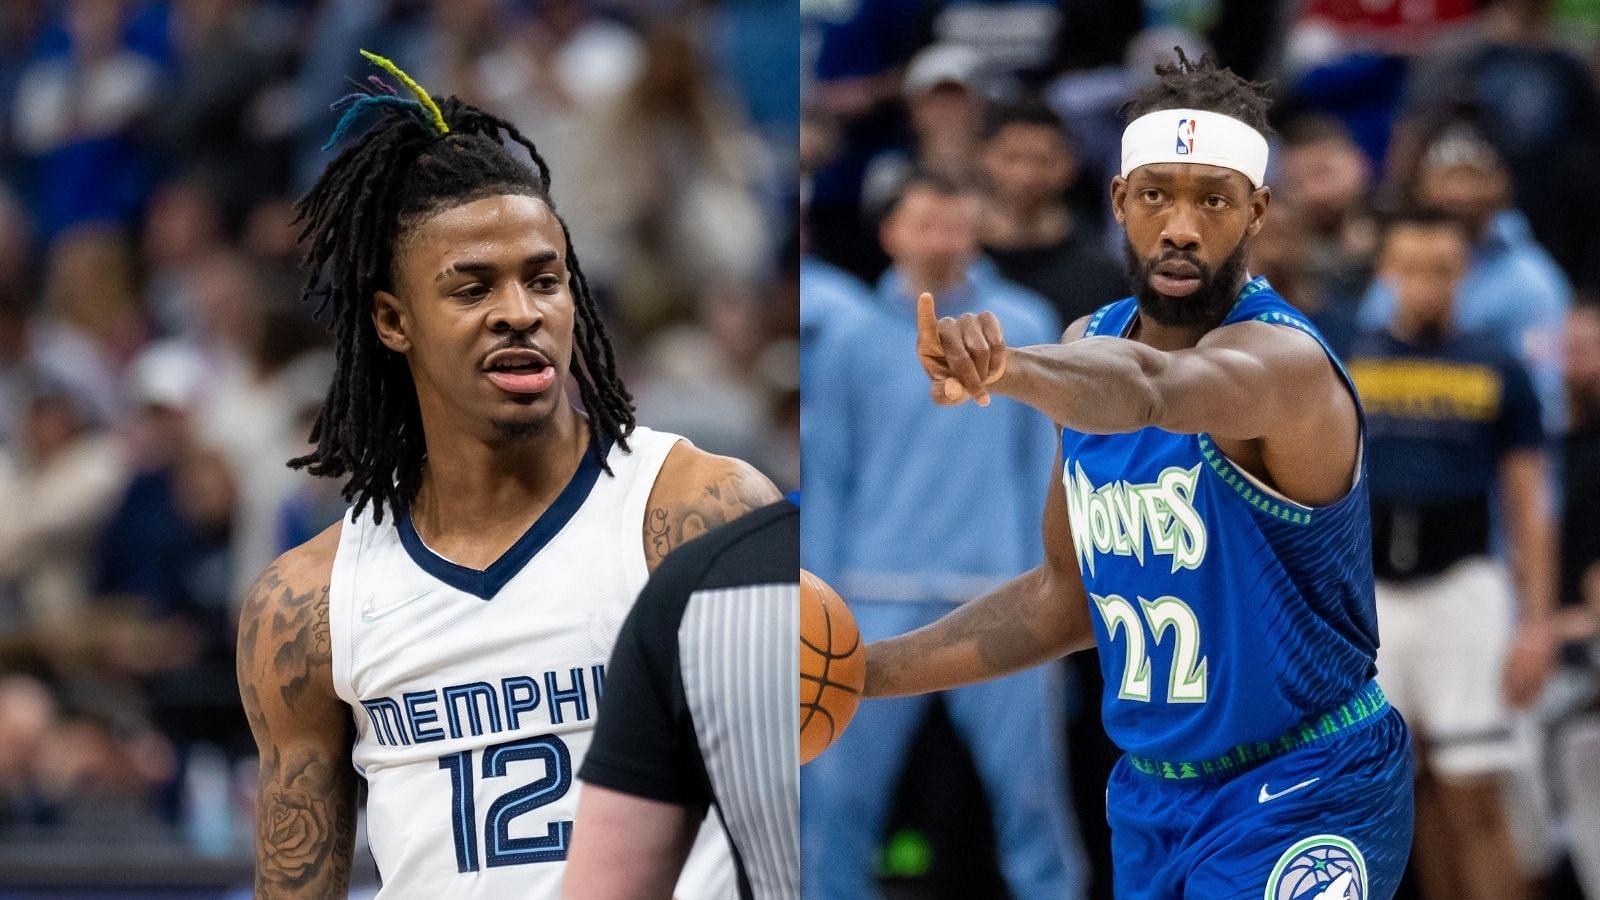 "Three mins into this game, Patrick Beverley hit Ja Morant with 'too small' twice": Timberwolves guard lives to regret his overexcitement, as Grizzlies get the win after going down 26